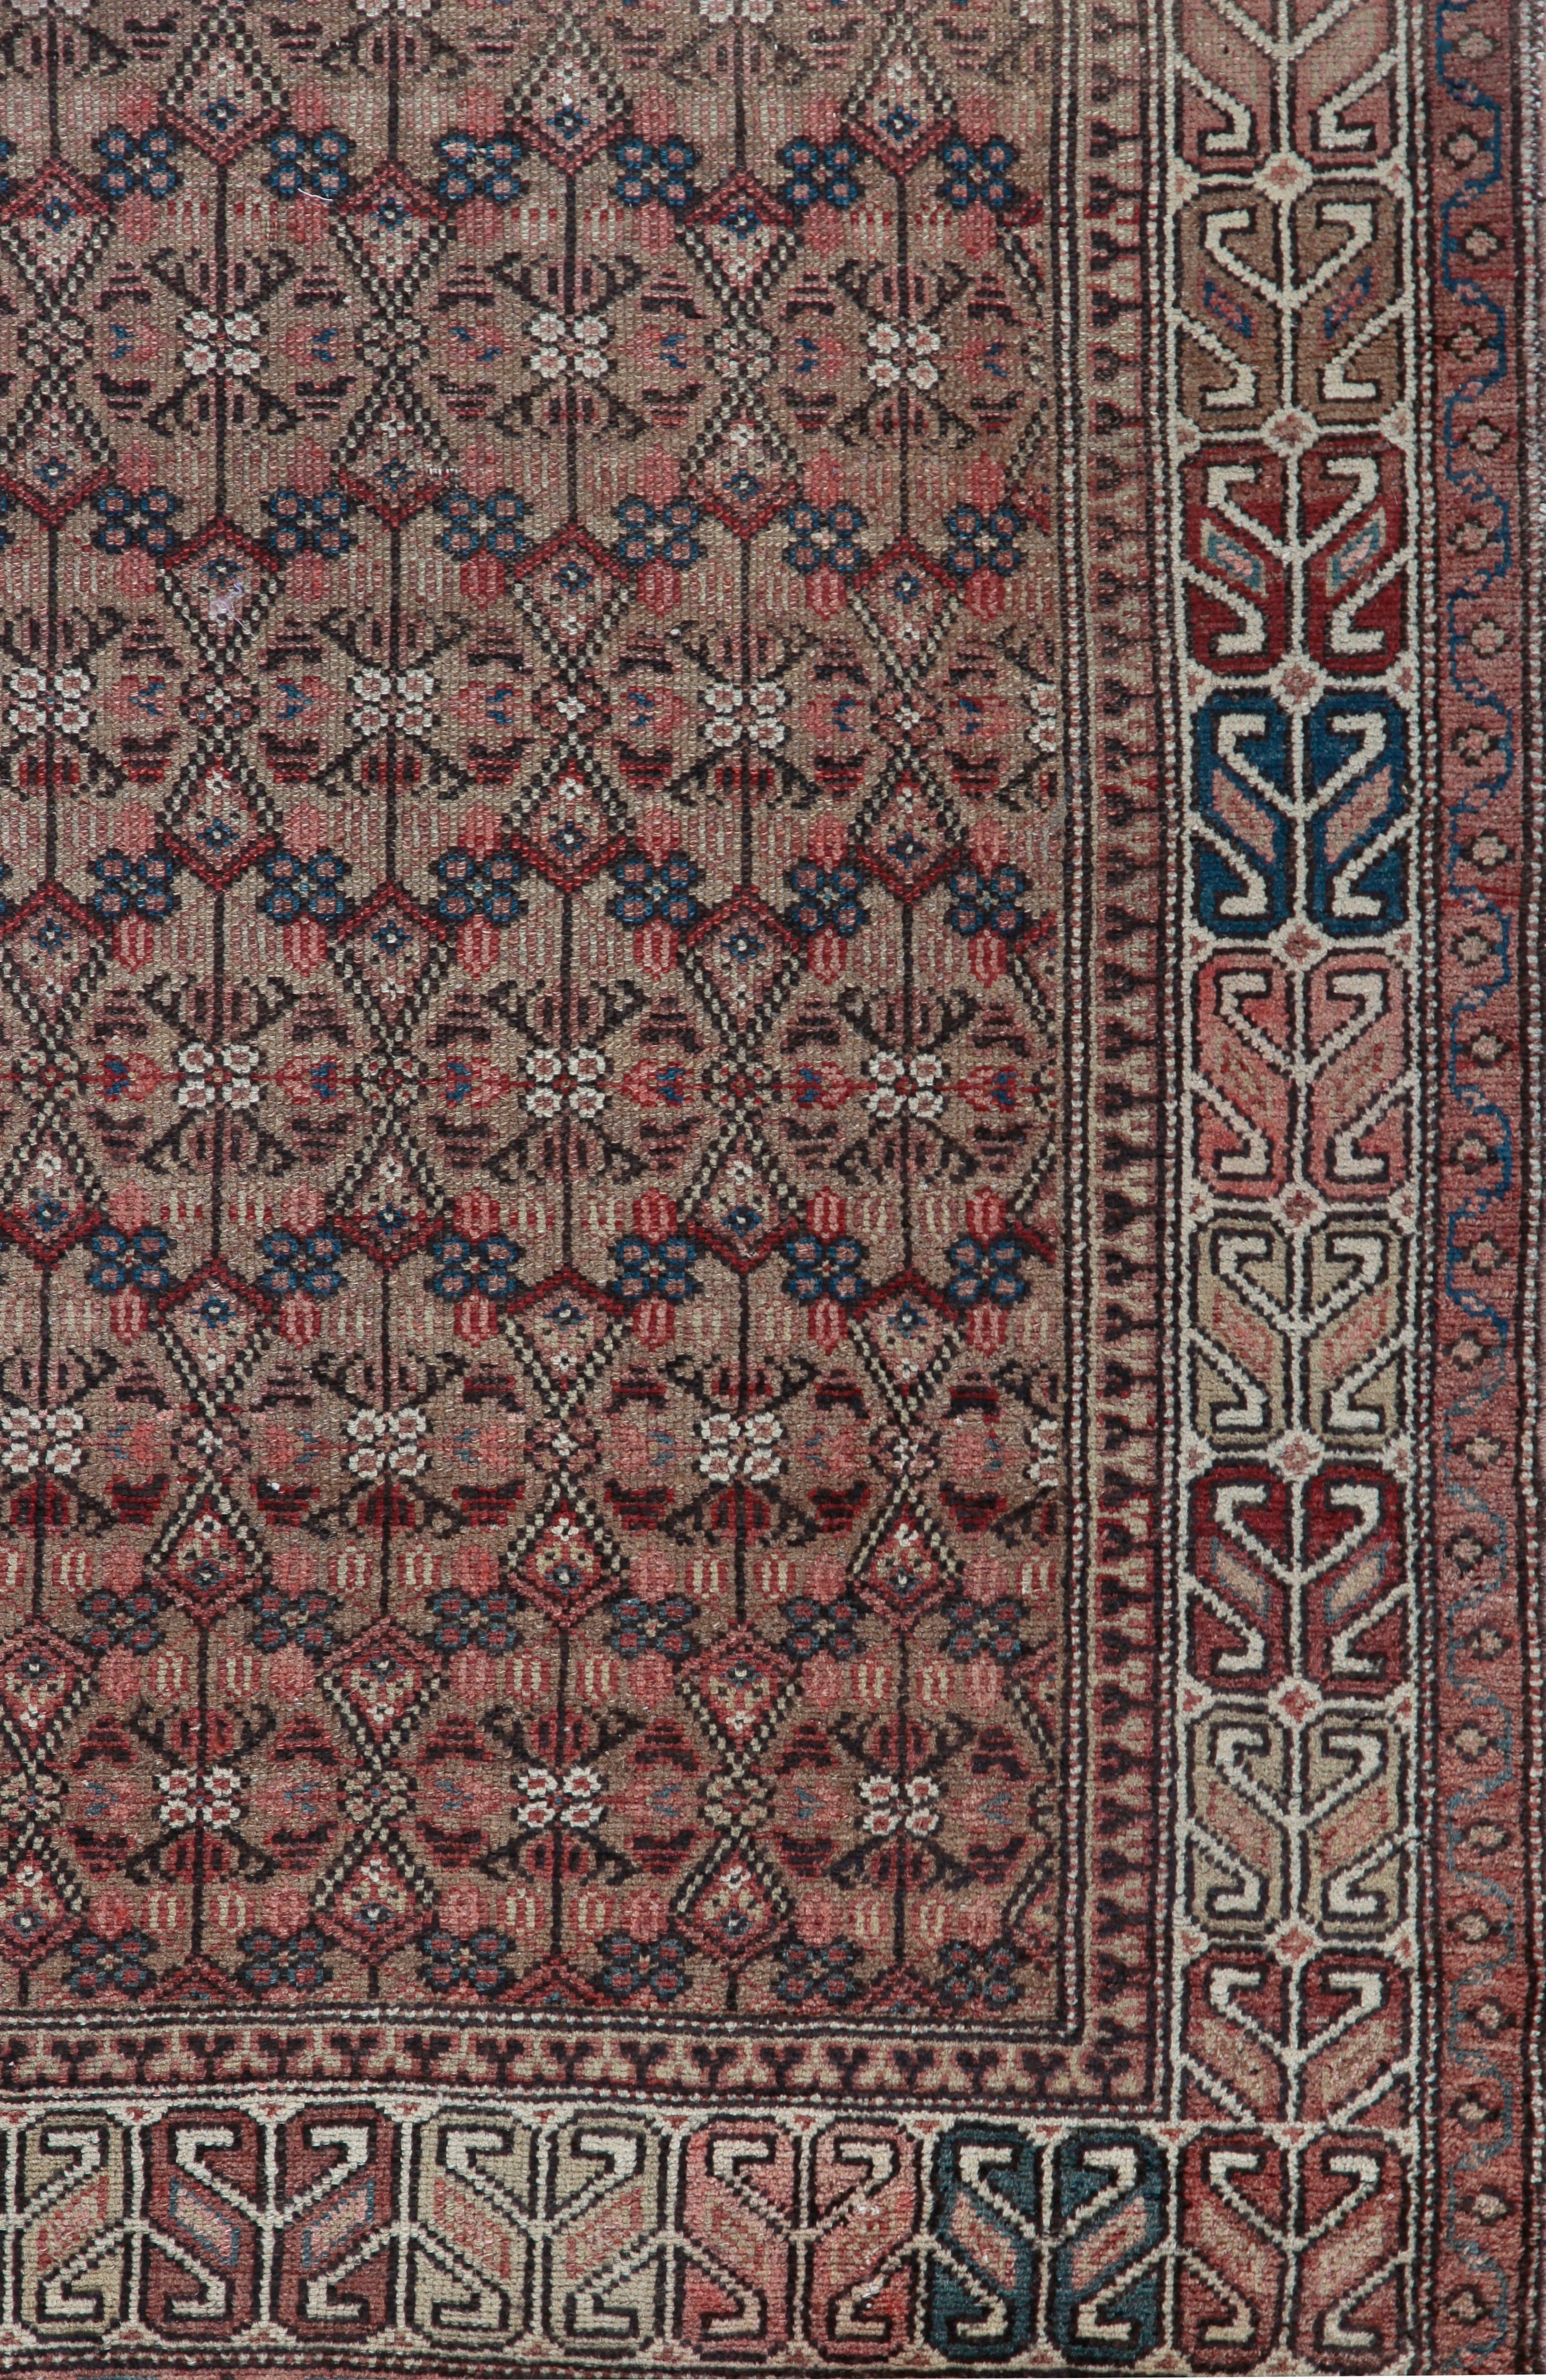 Antique Persian Malayer runner. Malayer rugs comes from west Persia near Hamadan woven in a range of medallion and all-over designs, they have a wonderful style that makes them excellent decorative pieces so suitable for today’s designs and themes.